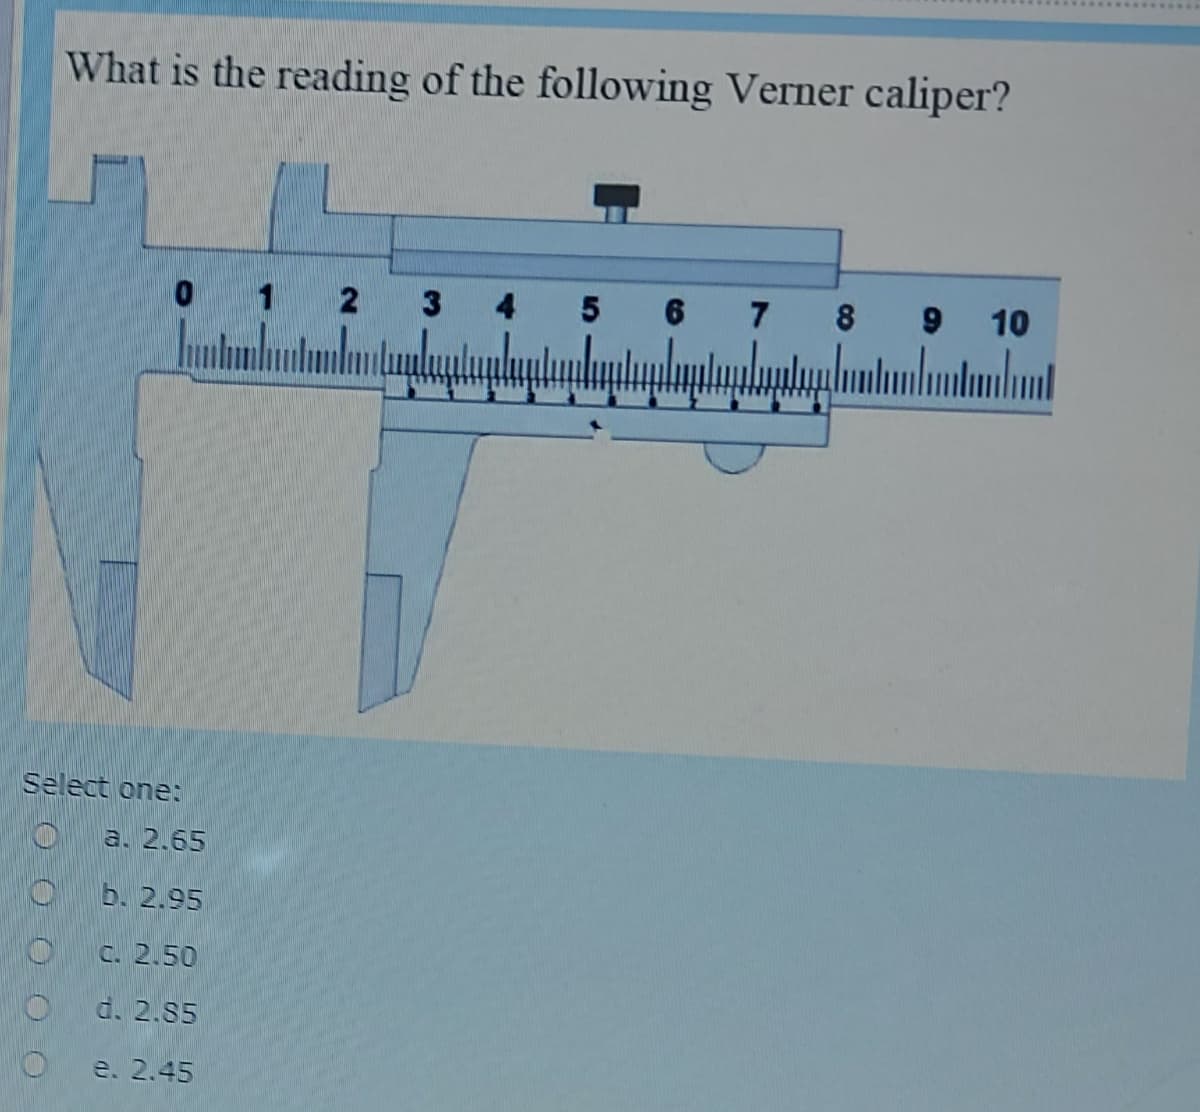 What is the reading of the following Verner caliper?
1
2
3
4
5 6
7 8
10
Select one:
O a. 2.65
b. 2.95
C. 2.50
d. 2.85
e. 2.45
